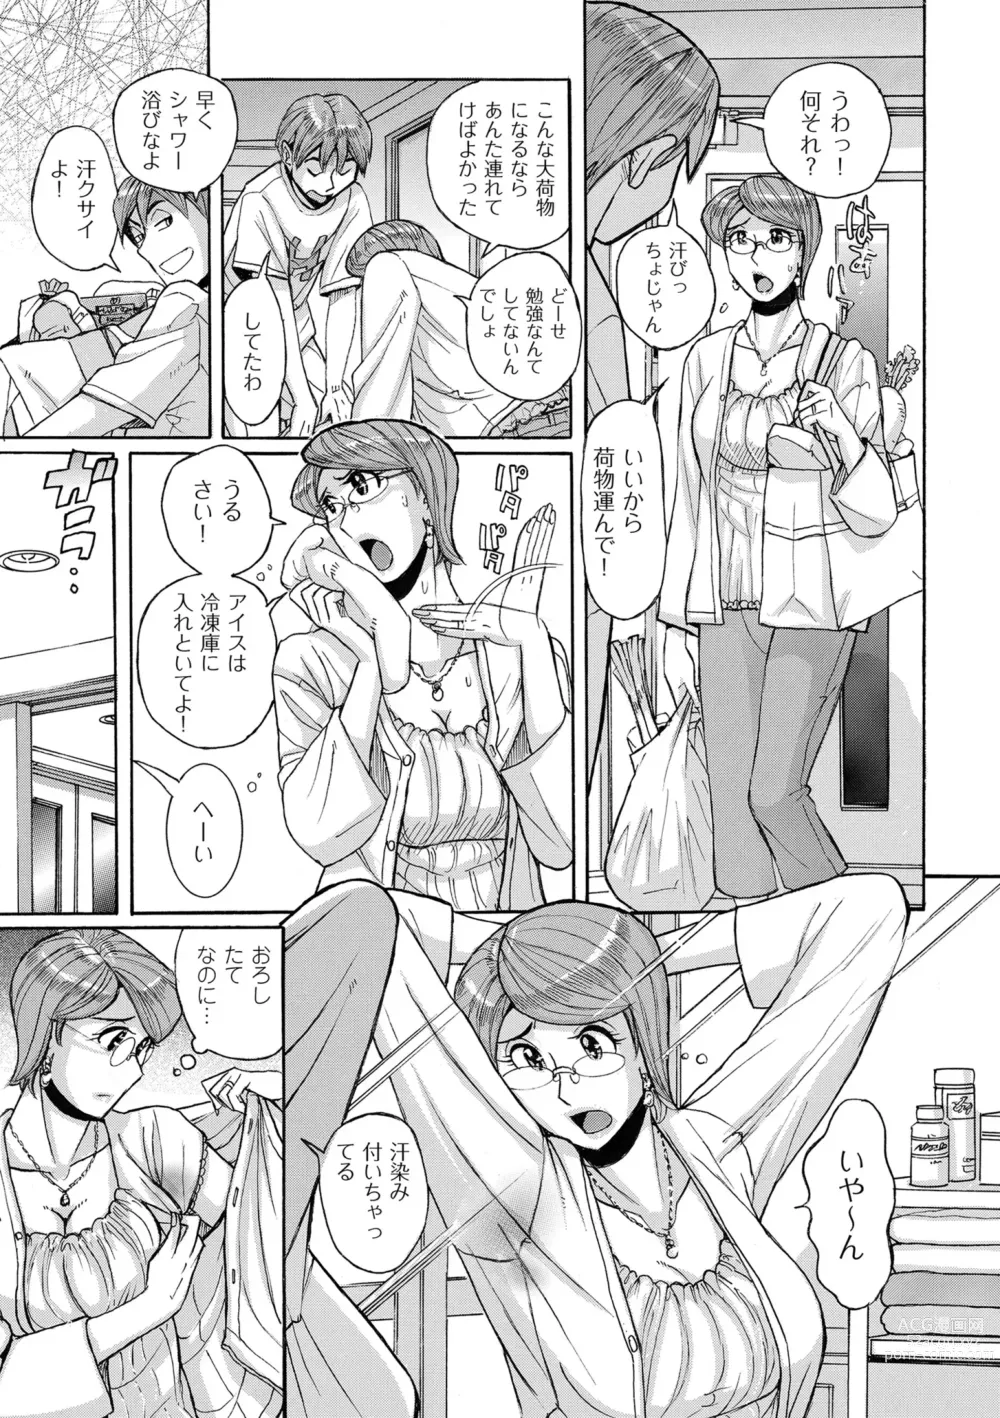 Page 7 of manga Mother’s Care Service How to ’Wincest’